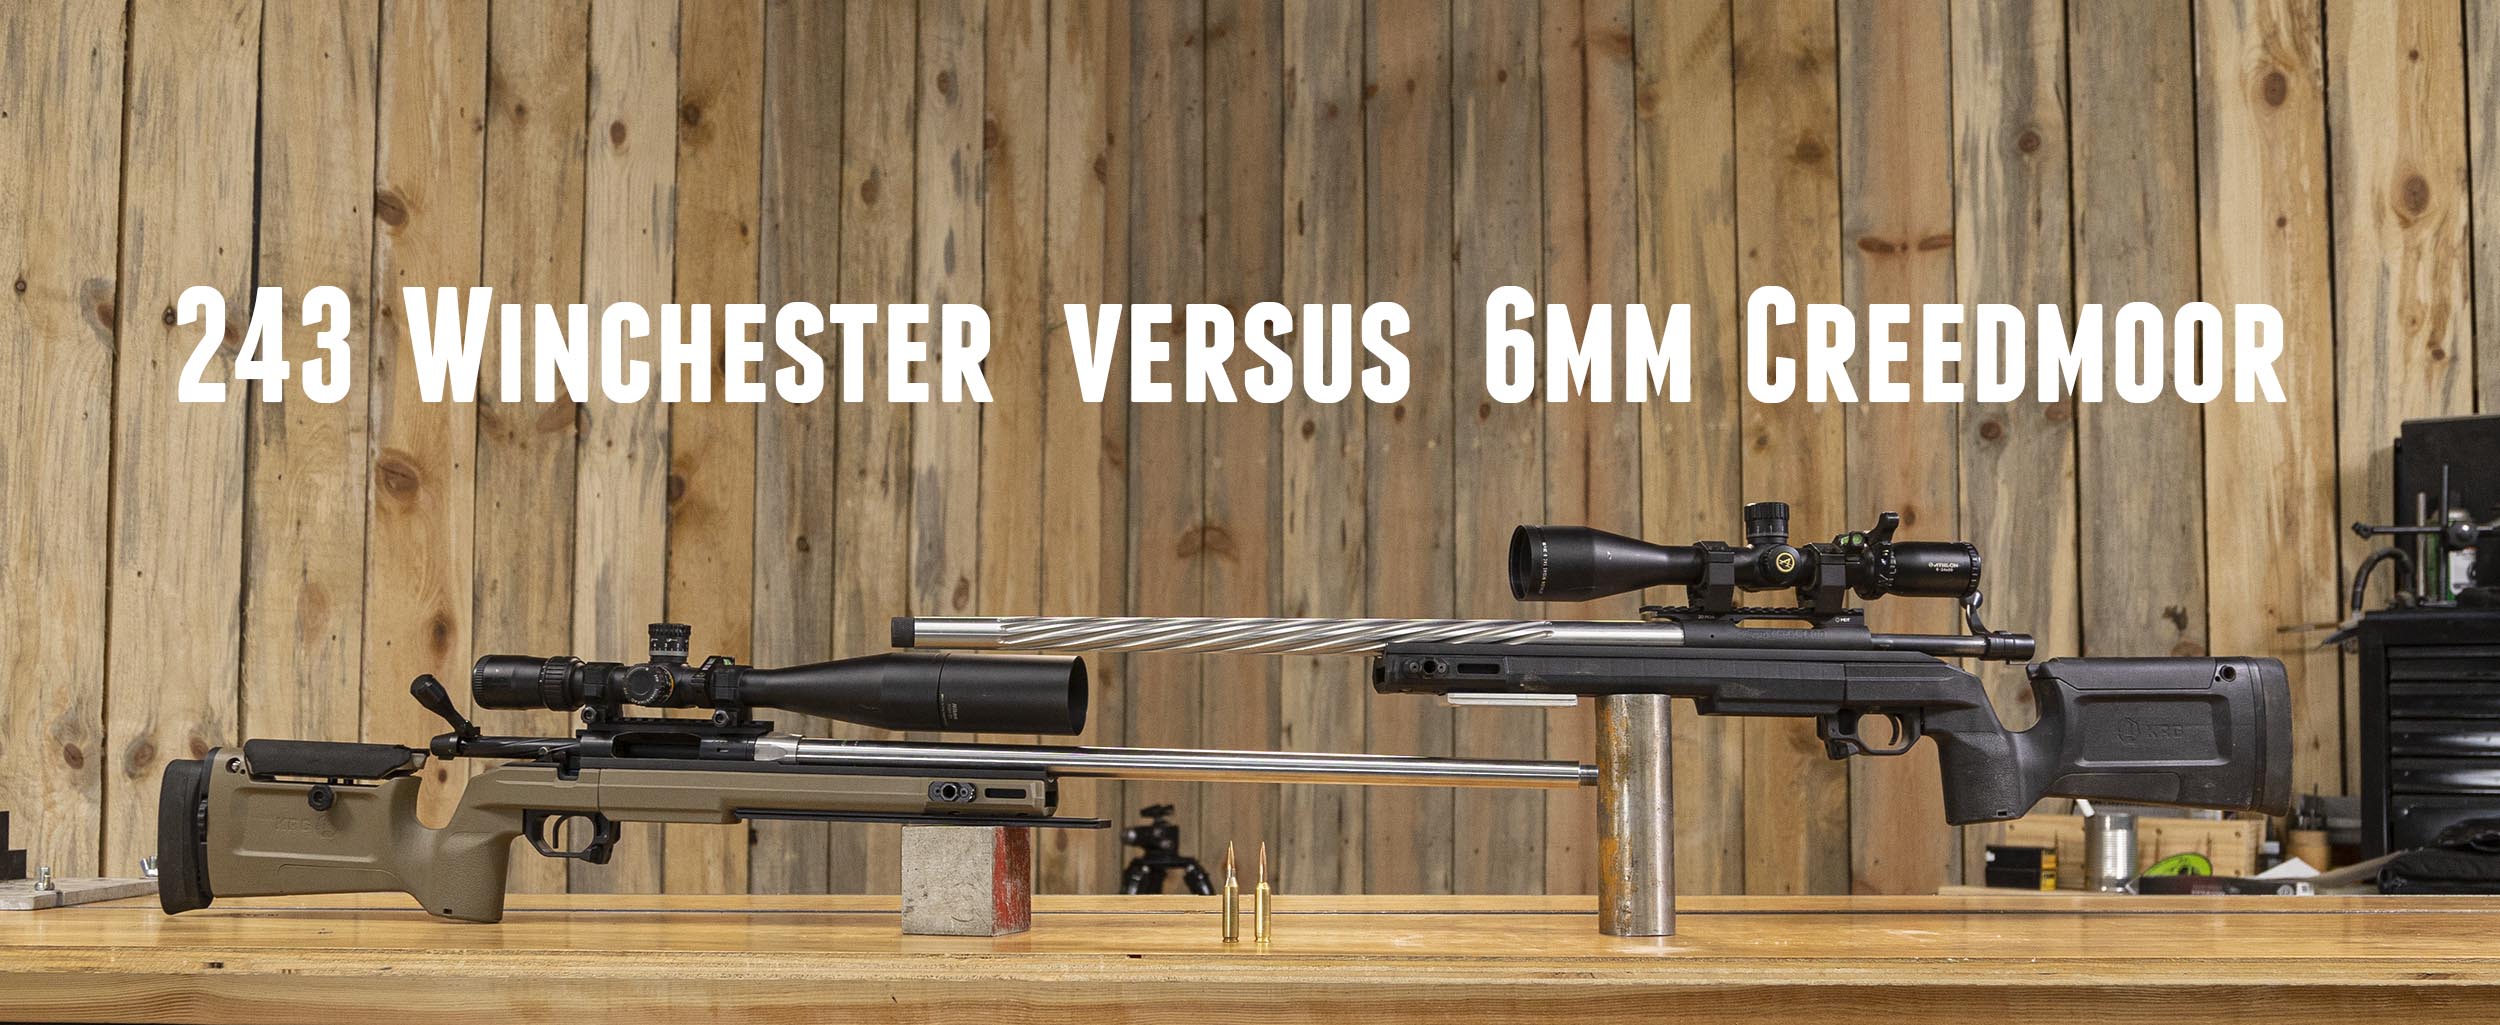 6.5 Creedmoor vs 243 Winchester Review & Comparison - Big Game Hunting Blog